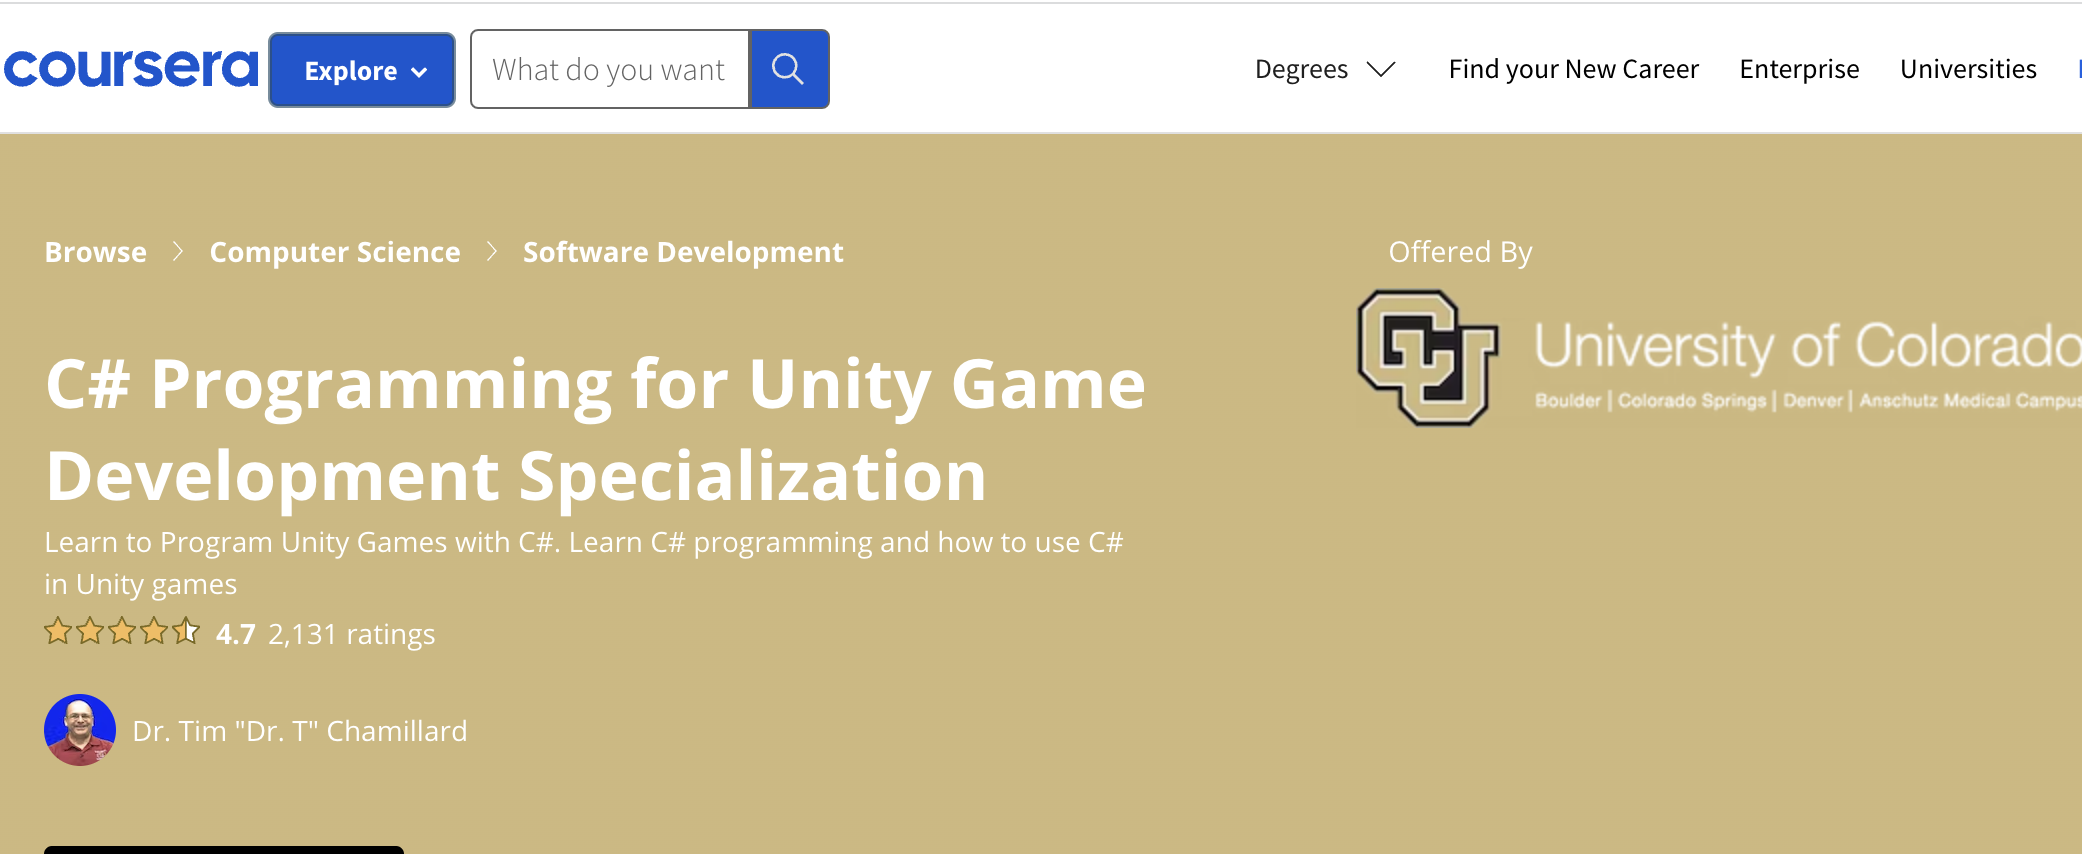 C# Programming for Unity Game Development Specialization